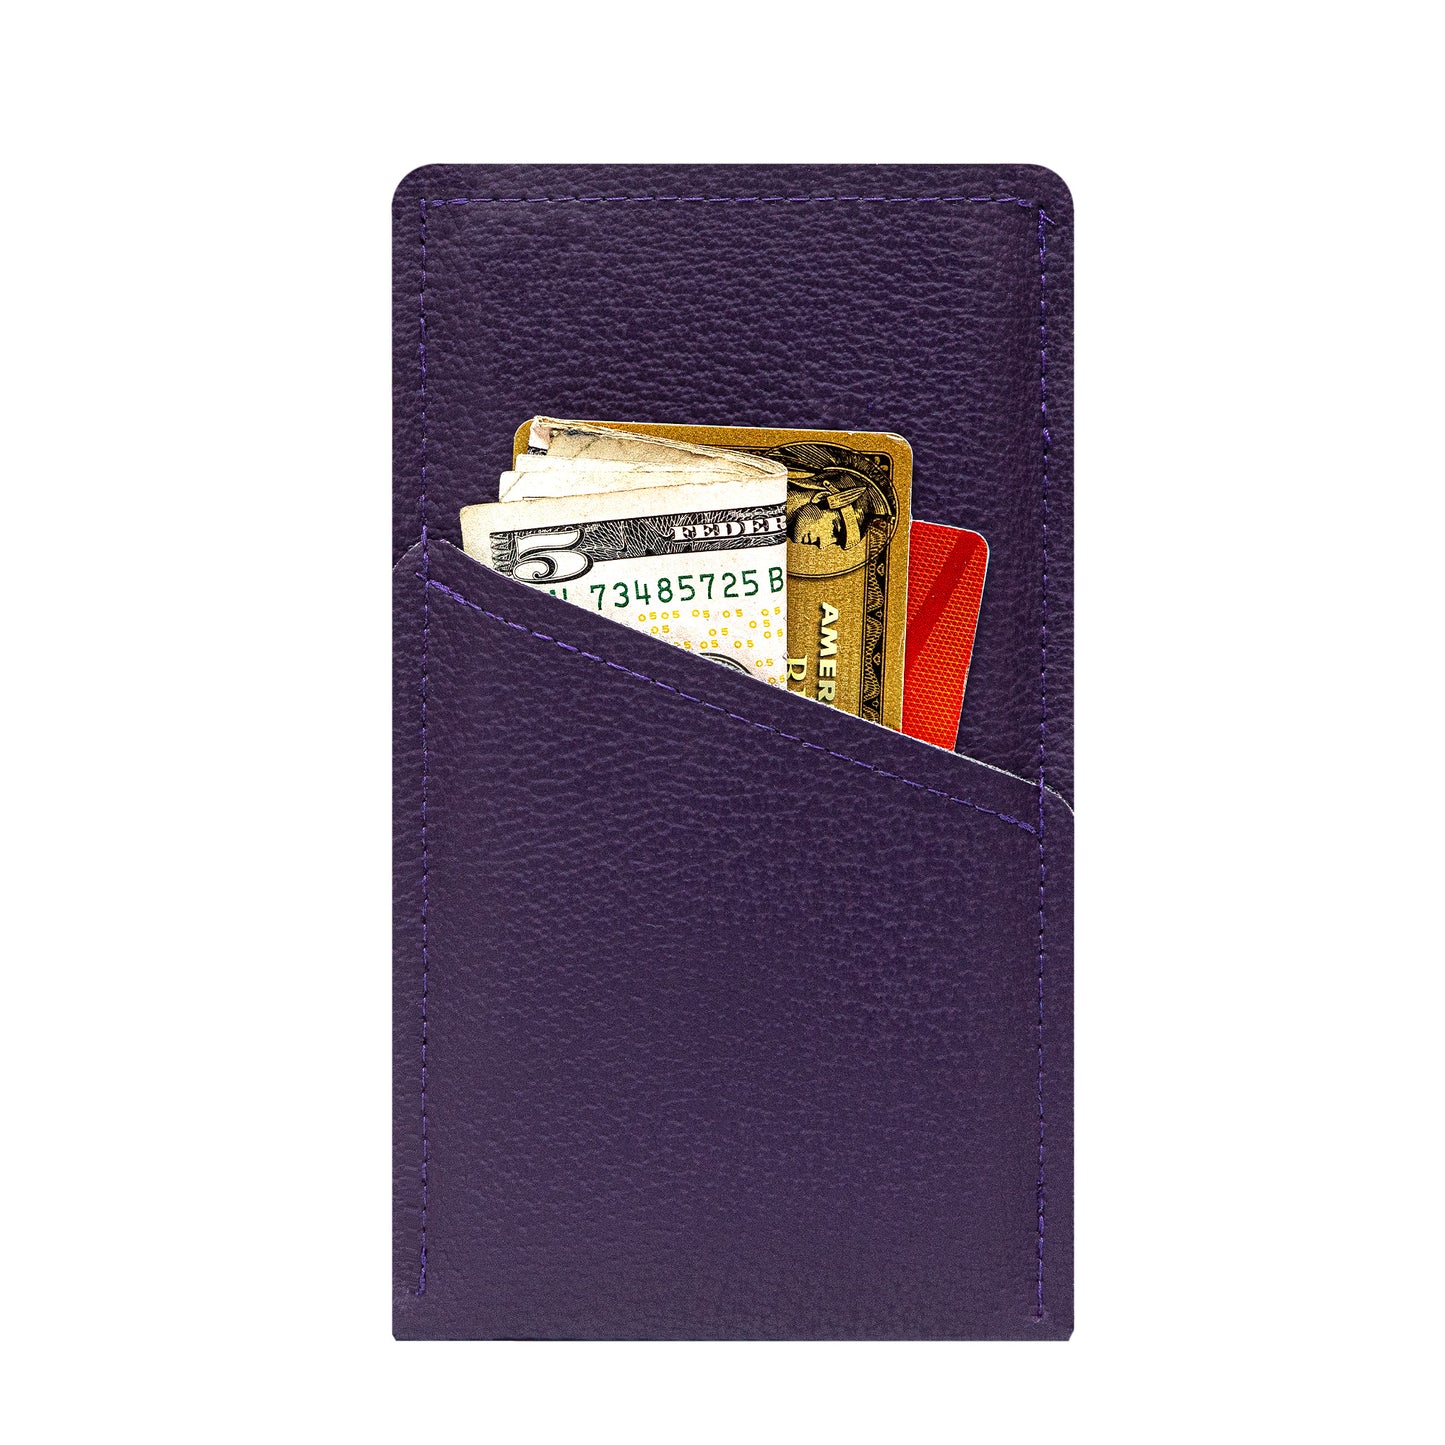 Modern Faux Leather iPhone Sleeve with Card Pocket – Plum Purple